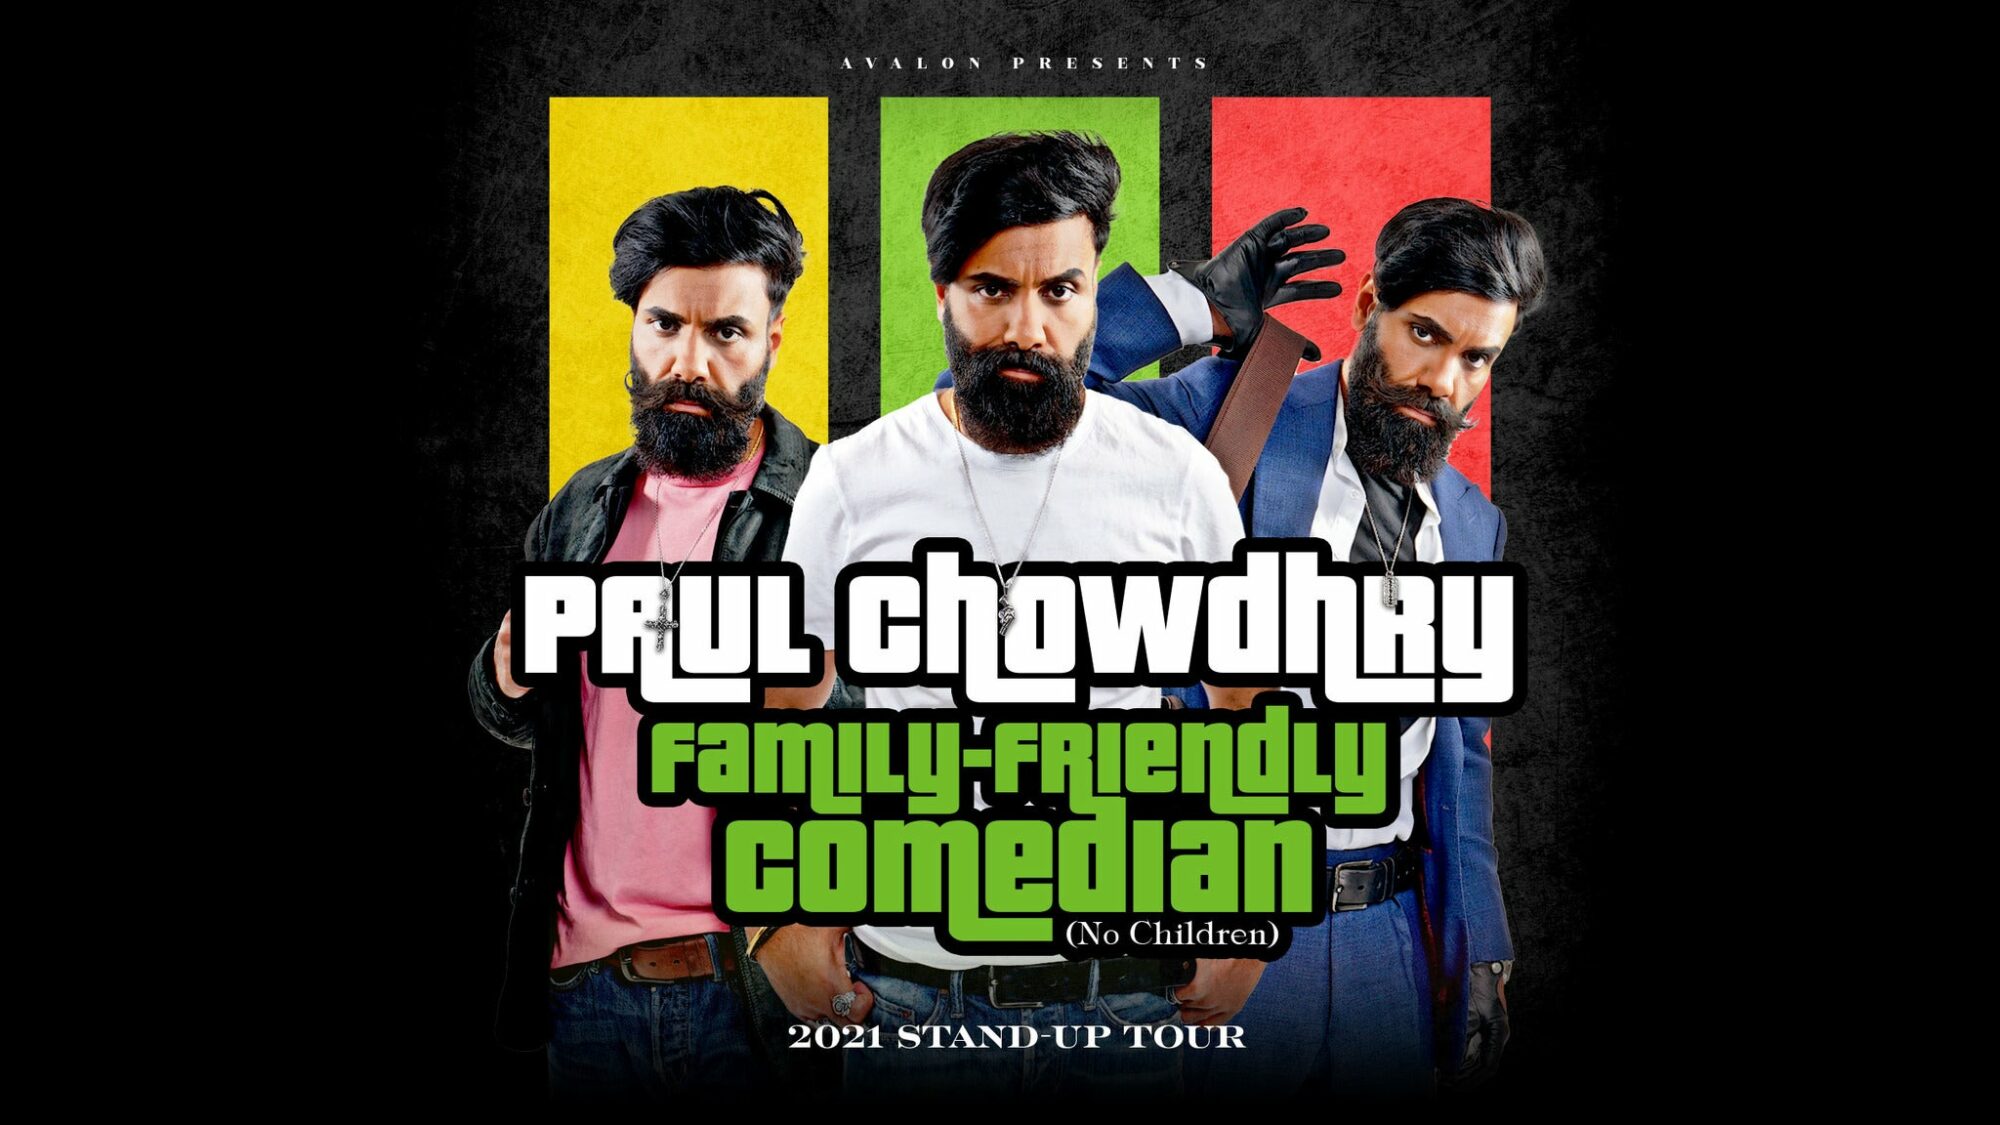 Image name Paul Chowdhry Family Friendly Comedian at St Georges Hall Bradford Bradford the 10 image from the post Events in Yorkshire.com.